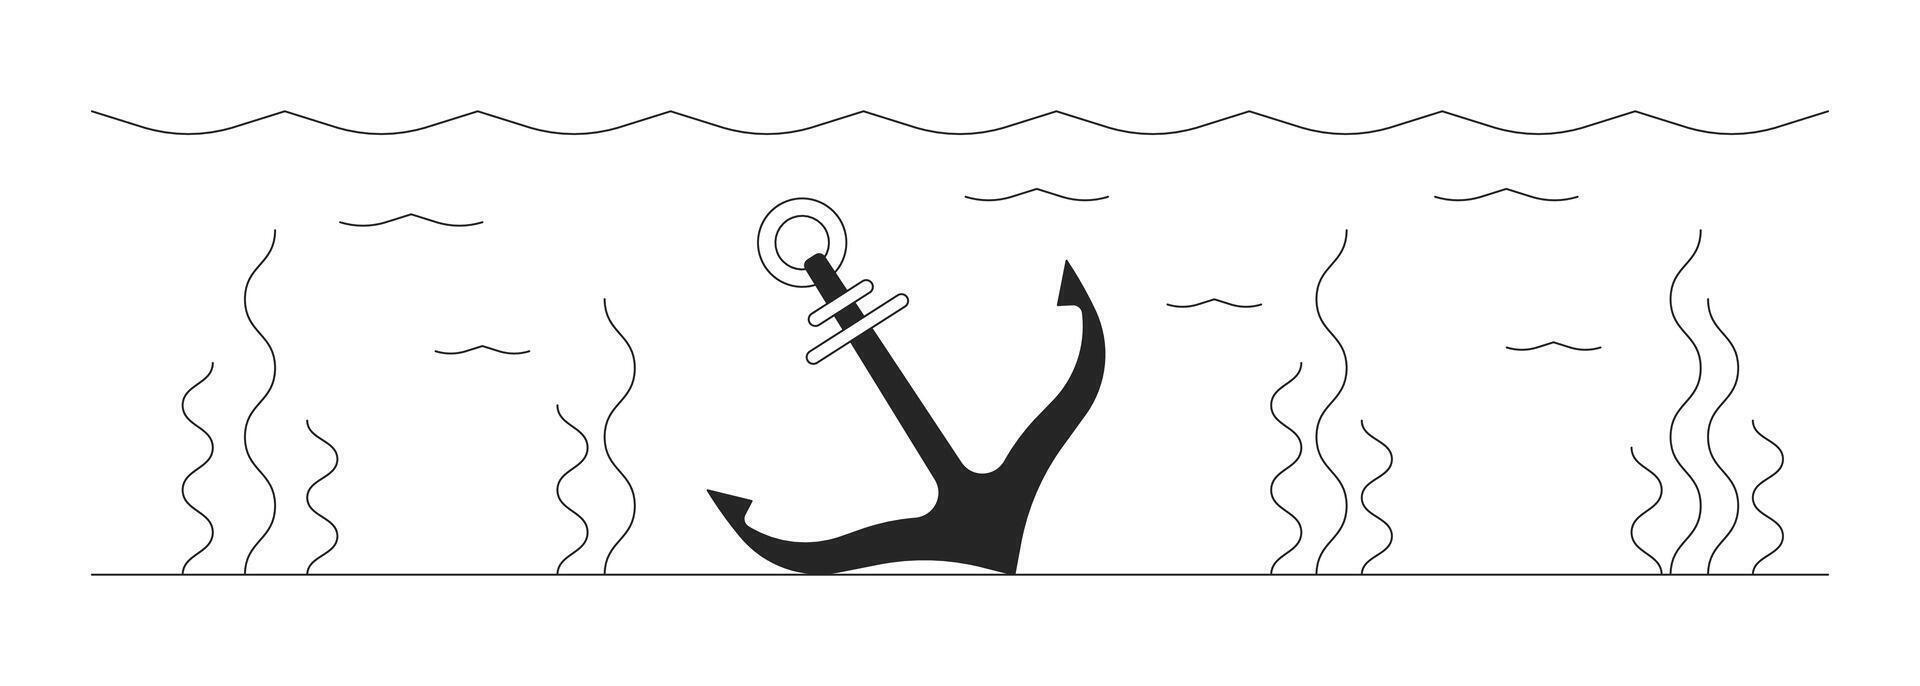 Lost ship anchor underwater 2D linear cartoon object. Vessel mooring tool on sea bottom isolated line element white background. Shipwreck consequences monochromatic flat spot illustration vector